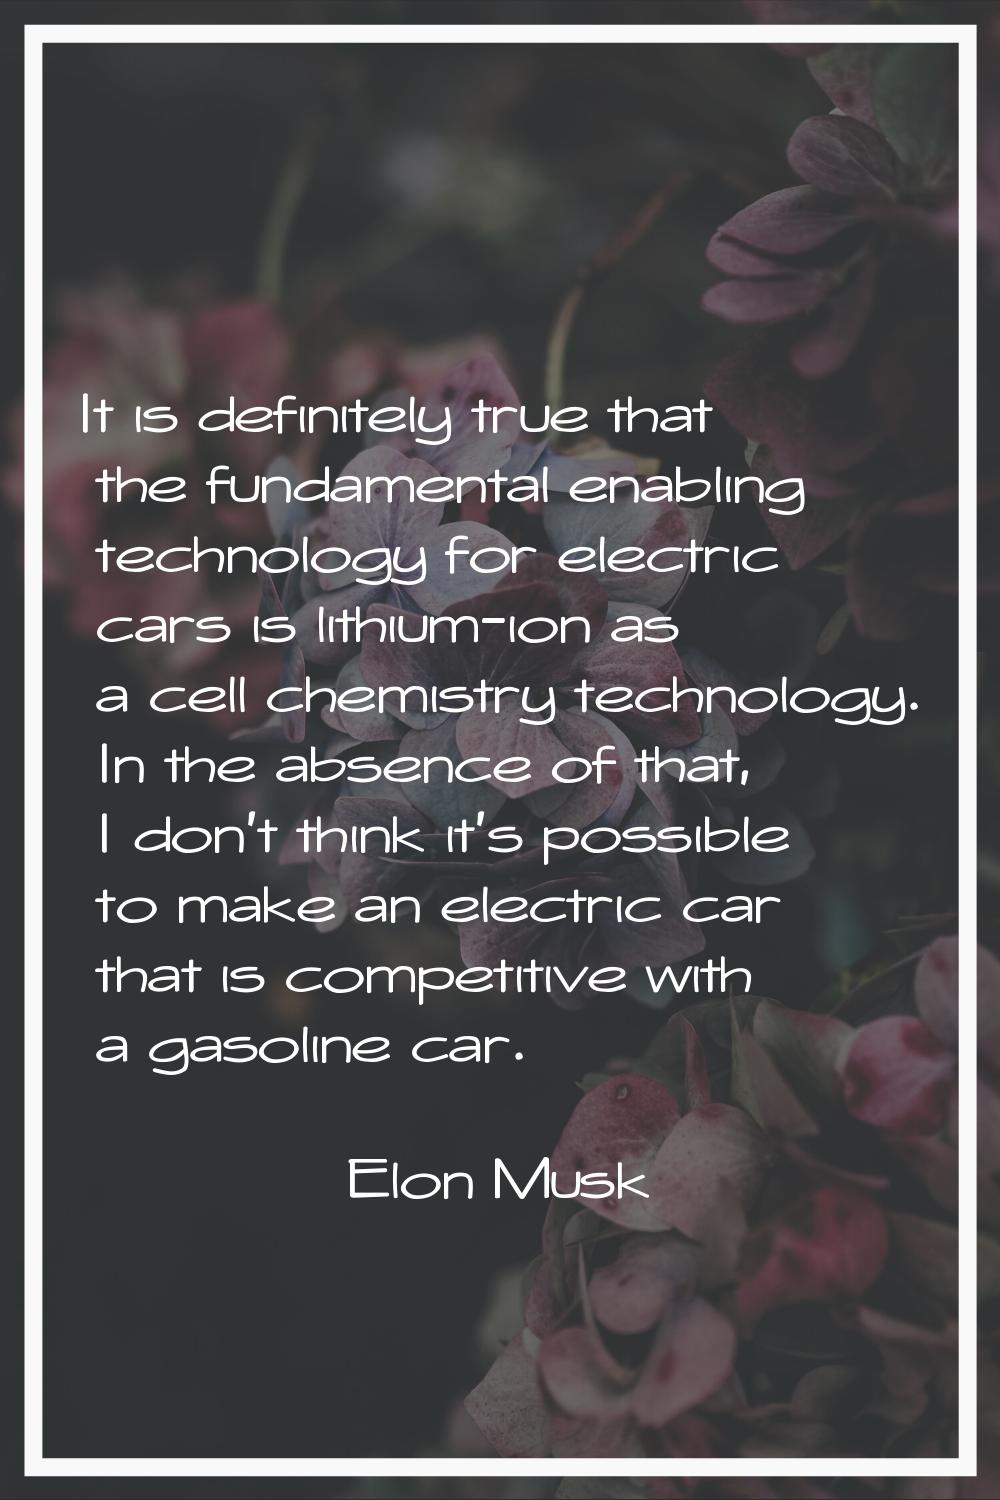 It is definitely true that the fundamental enabling technology for electric cars is lithium-ion as 